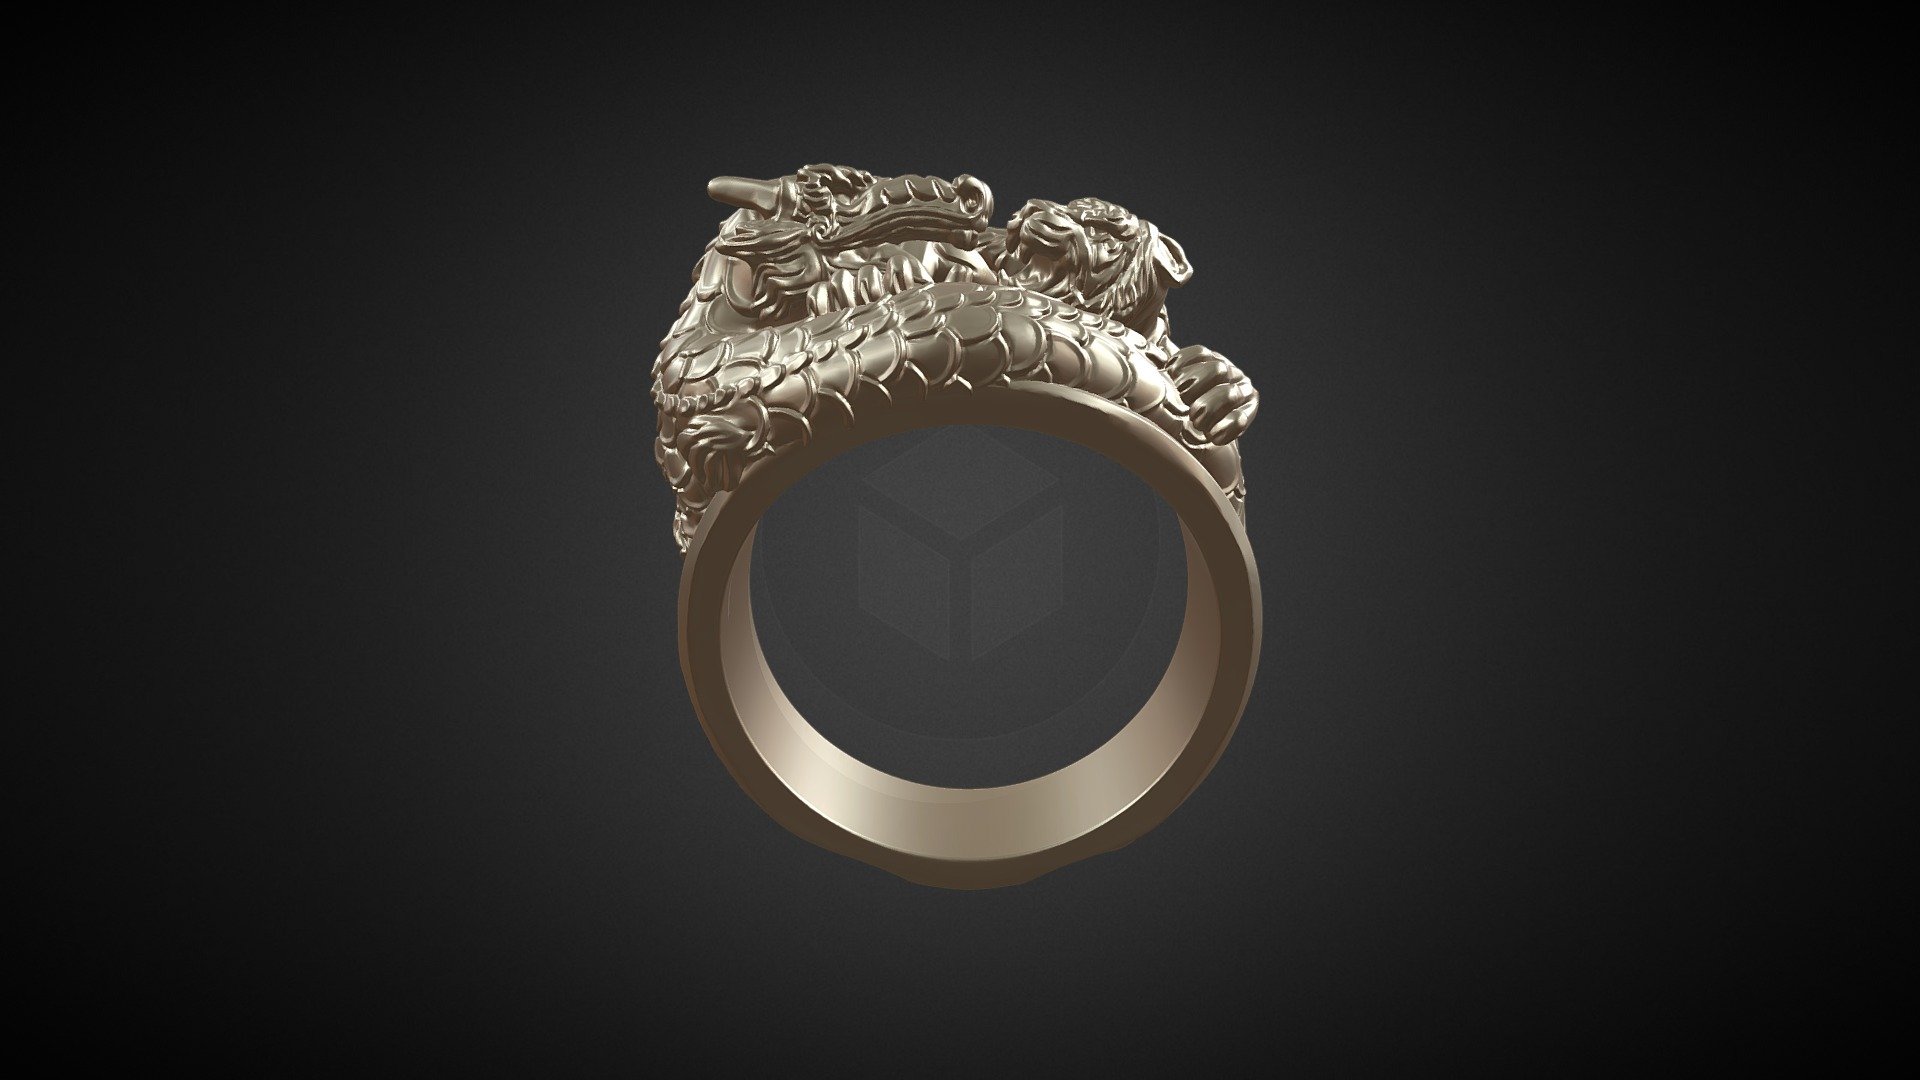 Dragon vs Tiger Ring sculpted in Zbrush 3d printed in Bropnze and Silver
more info and images can be found Here: http://shpws.me/OCfw - Tiger vs Dragon Ring - 3D model by Nello 3d model